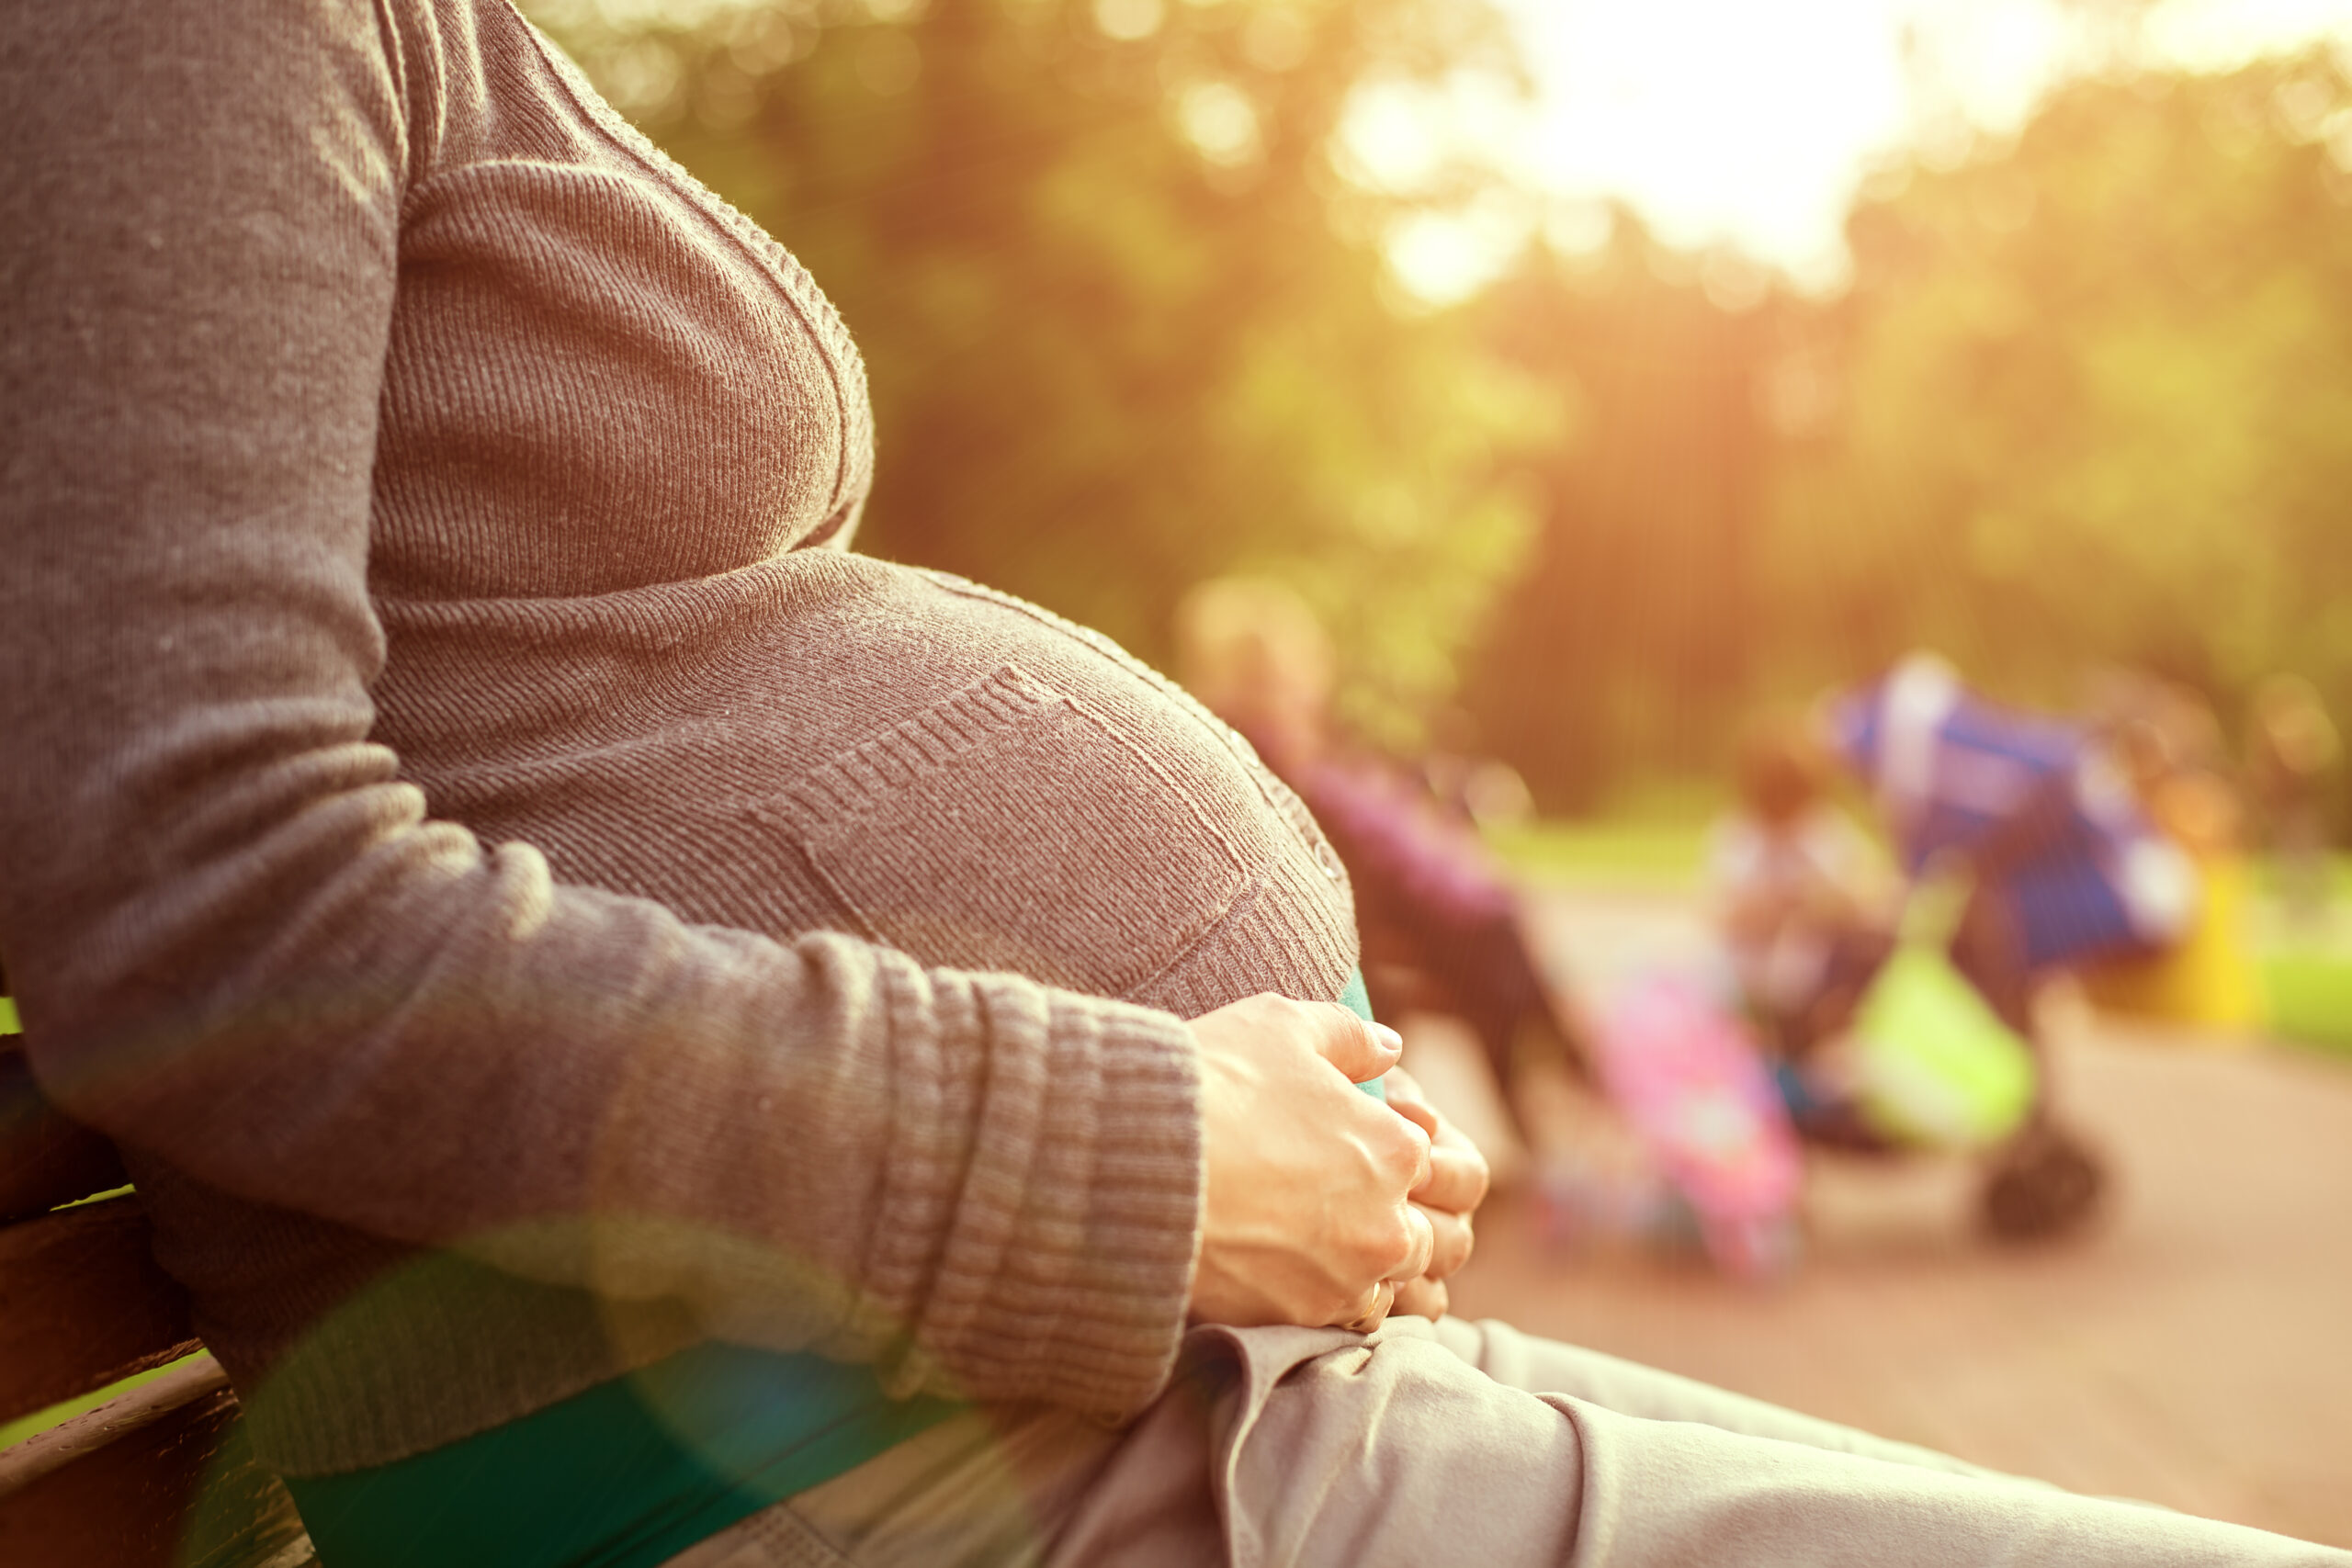 6 FAQs about Mental Health and Addiction Care for Pregnant Women